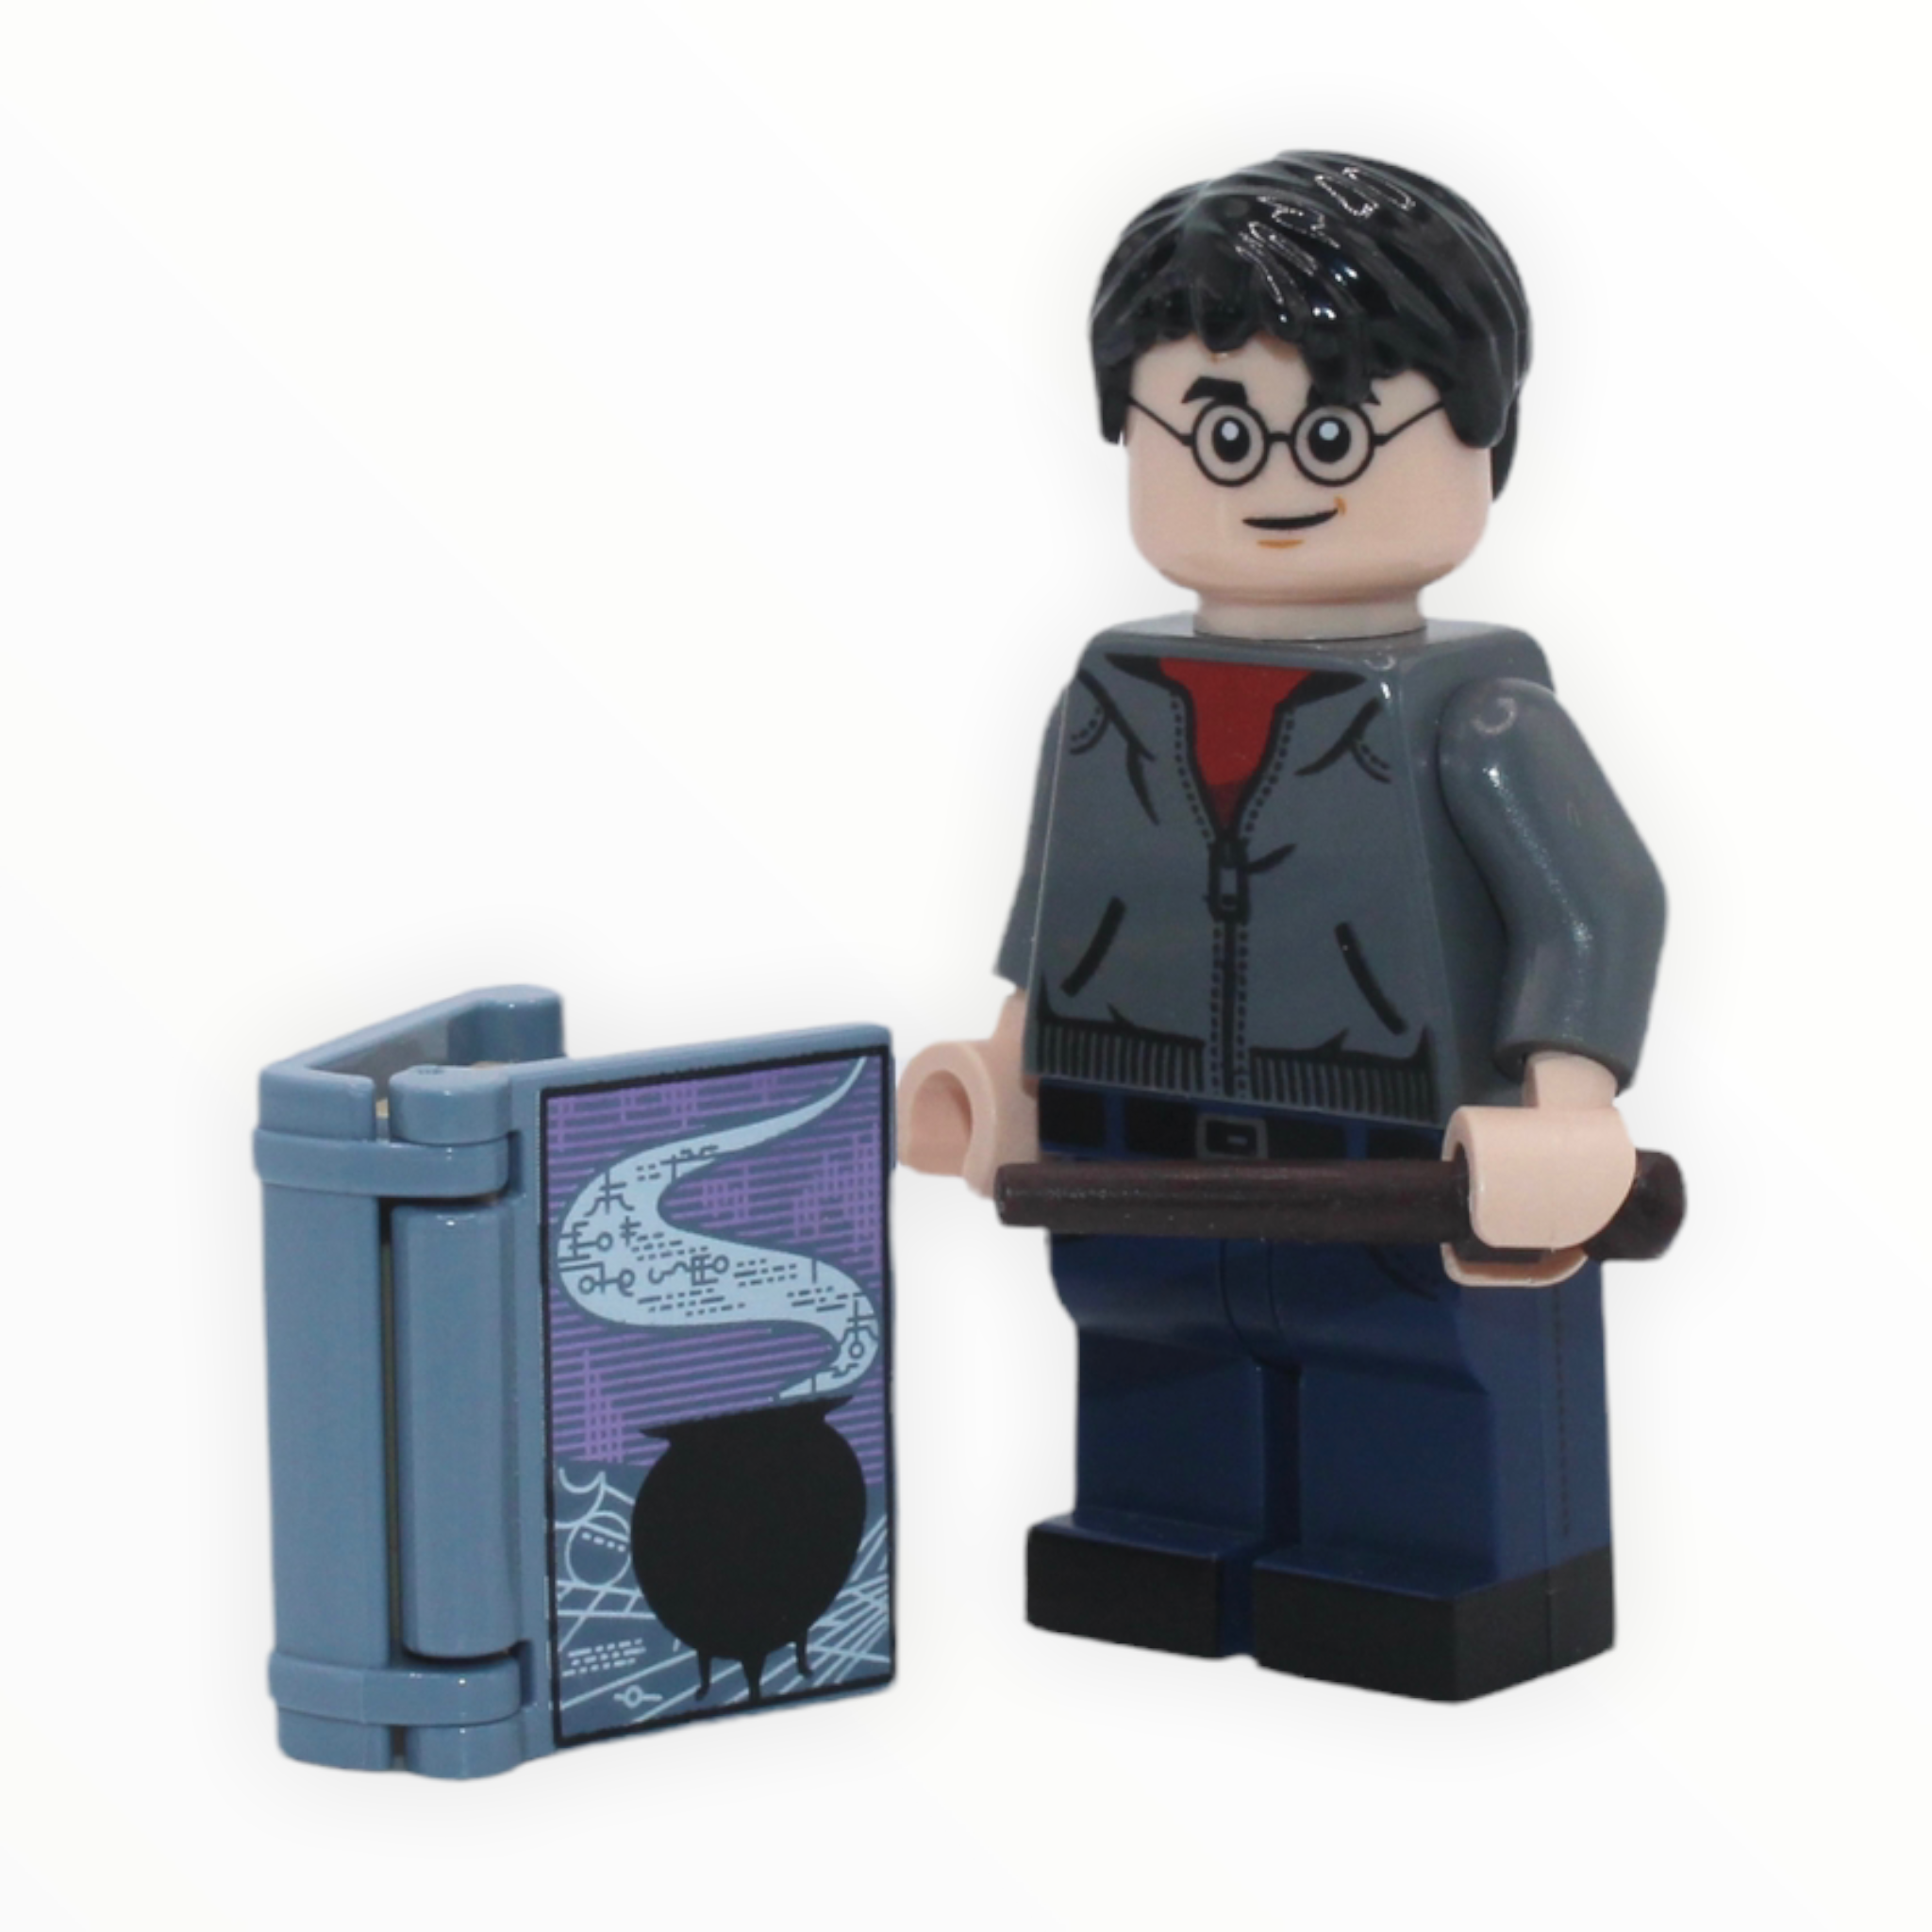 Harry Potter Series 2: Harry Potter with Advanced Potion Making